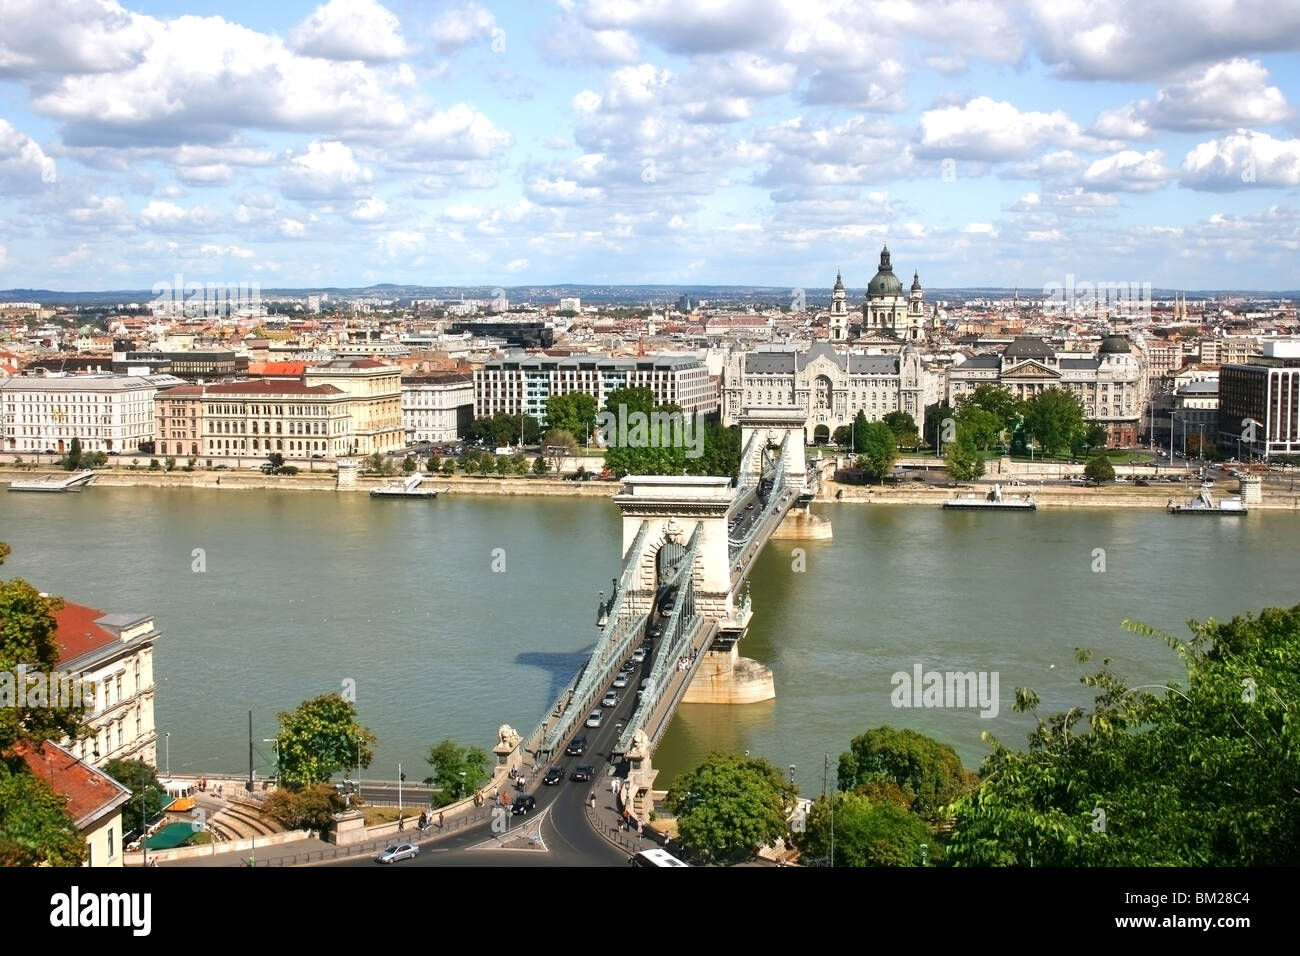 View of Budapest over the River Danube from Castle Hill. Hungary Stock Photo